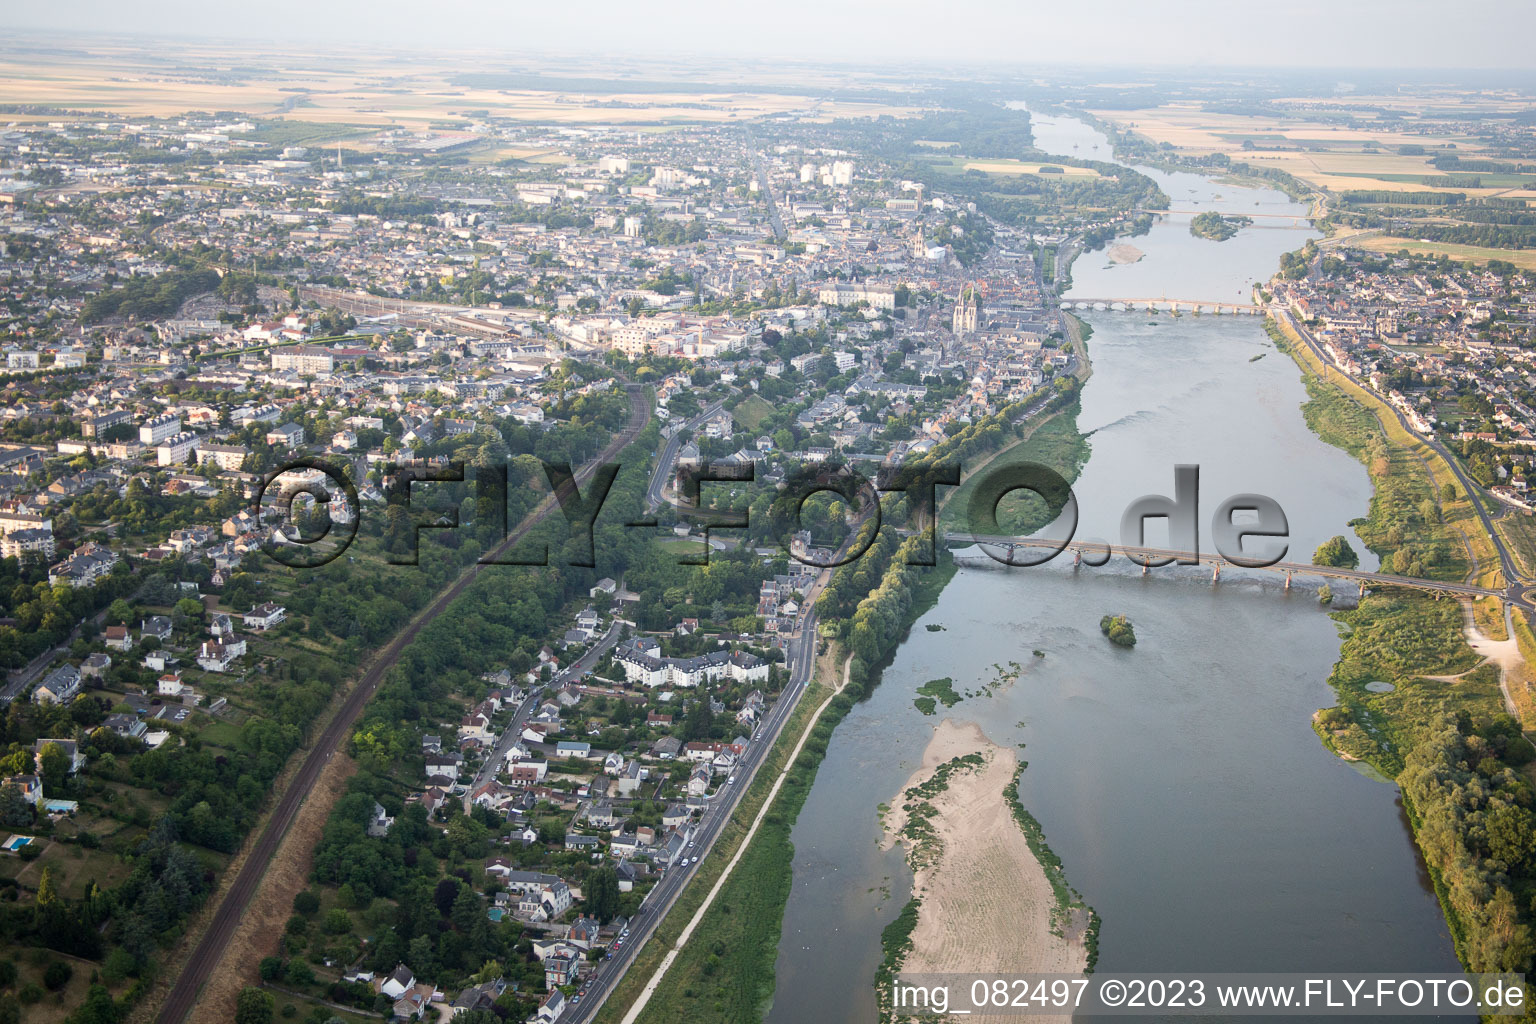 Blois in the state Loir et Cher, France from the plane